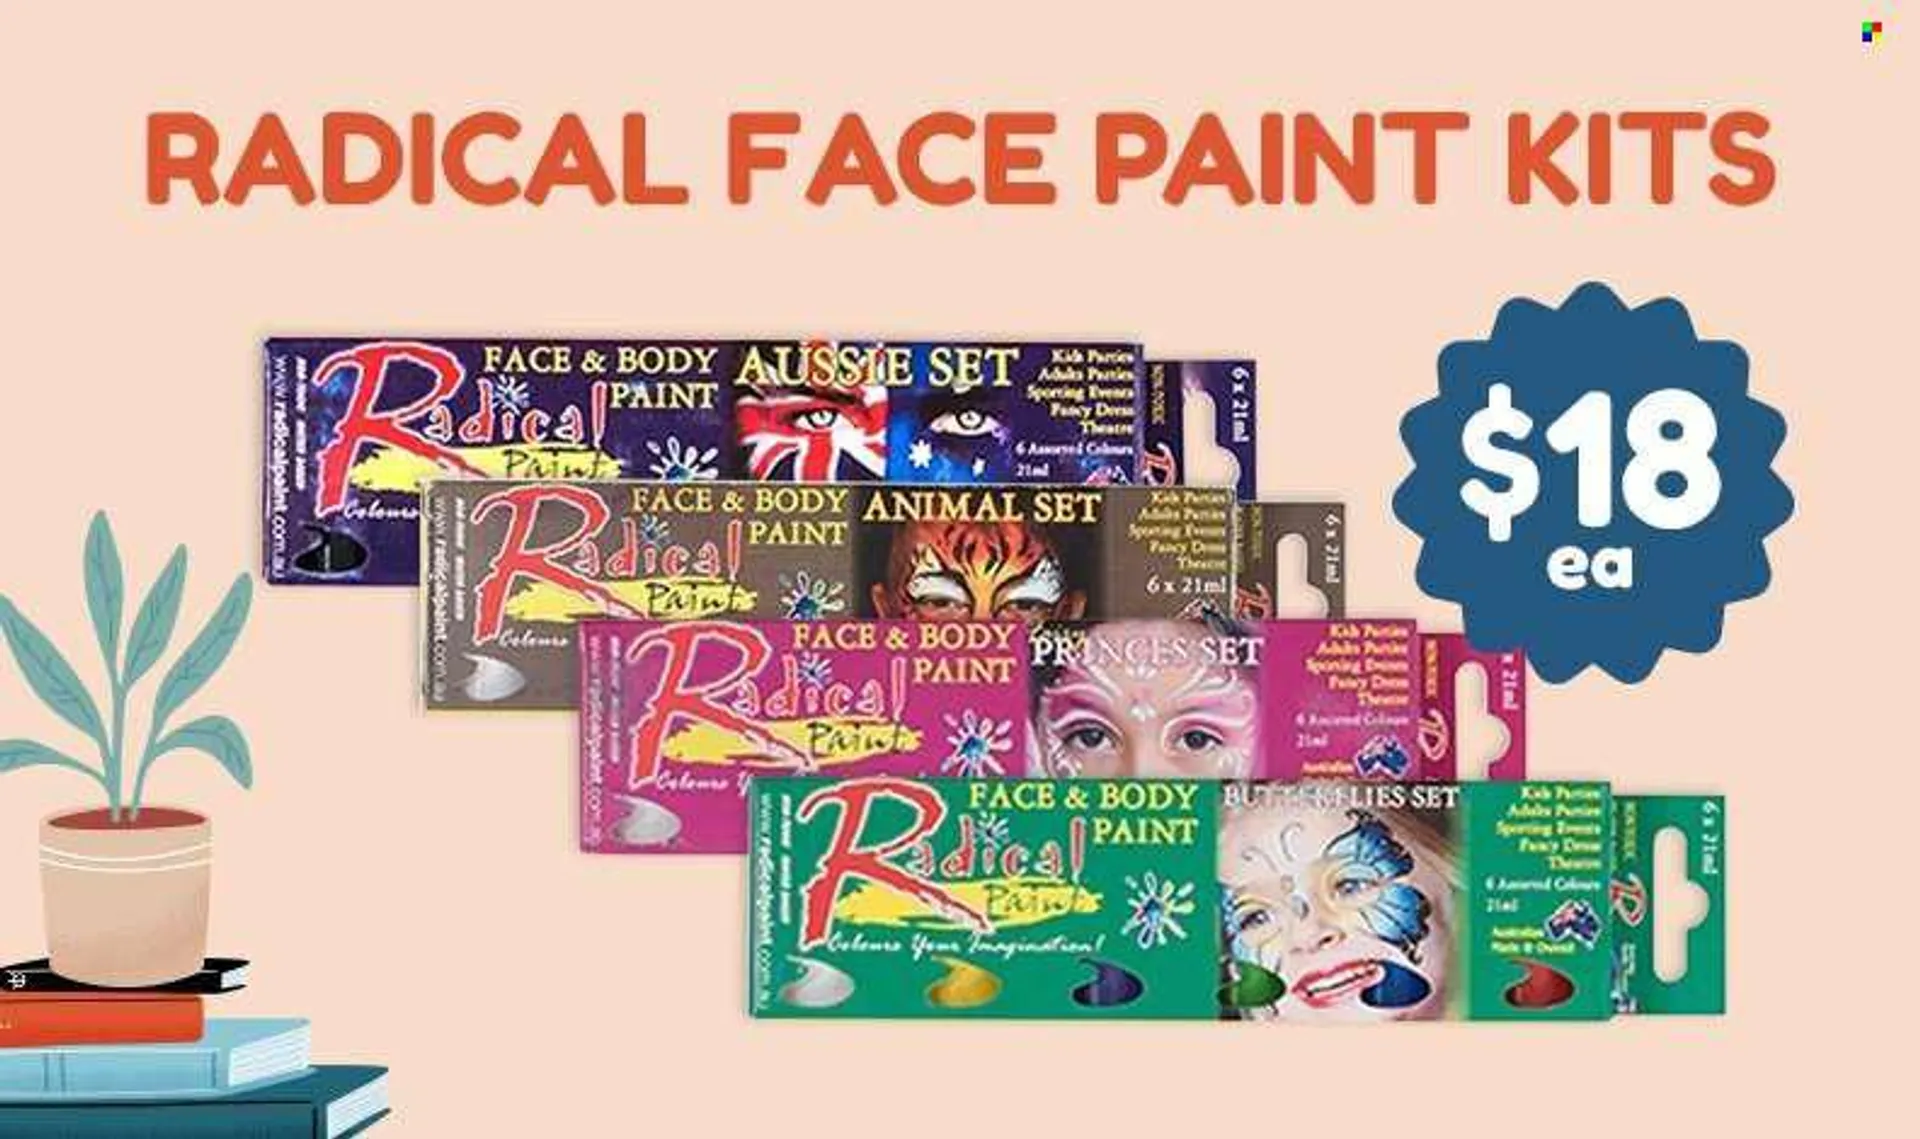 Lincraft mailer - Sales products - face paint. Page 3.